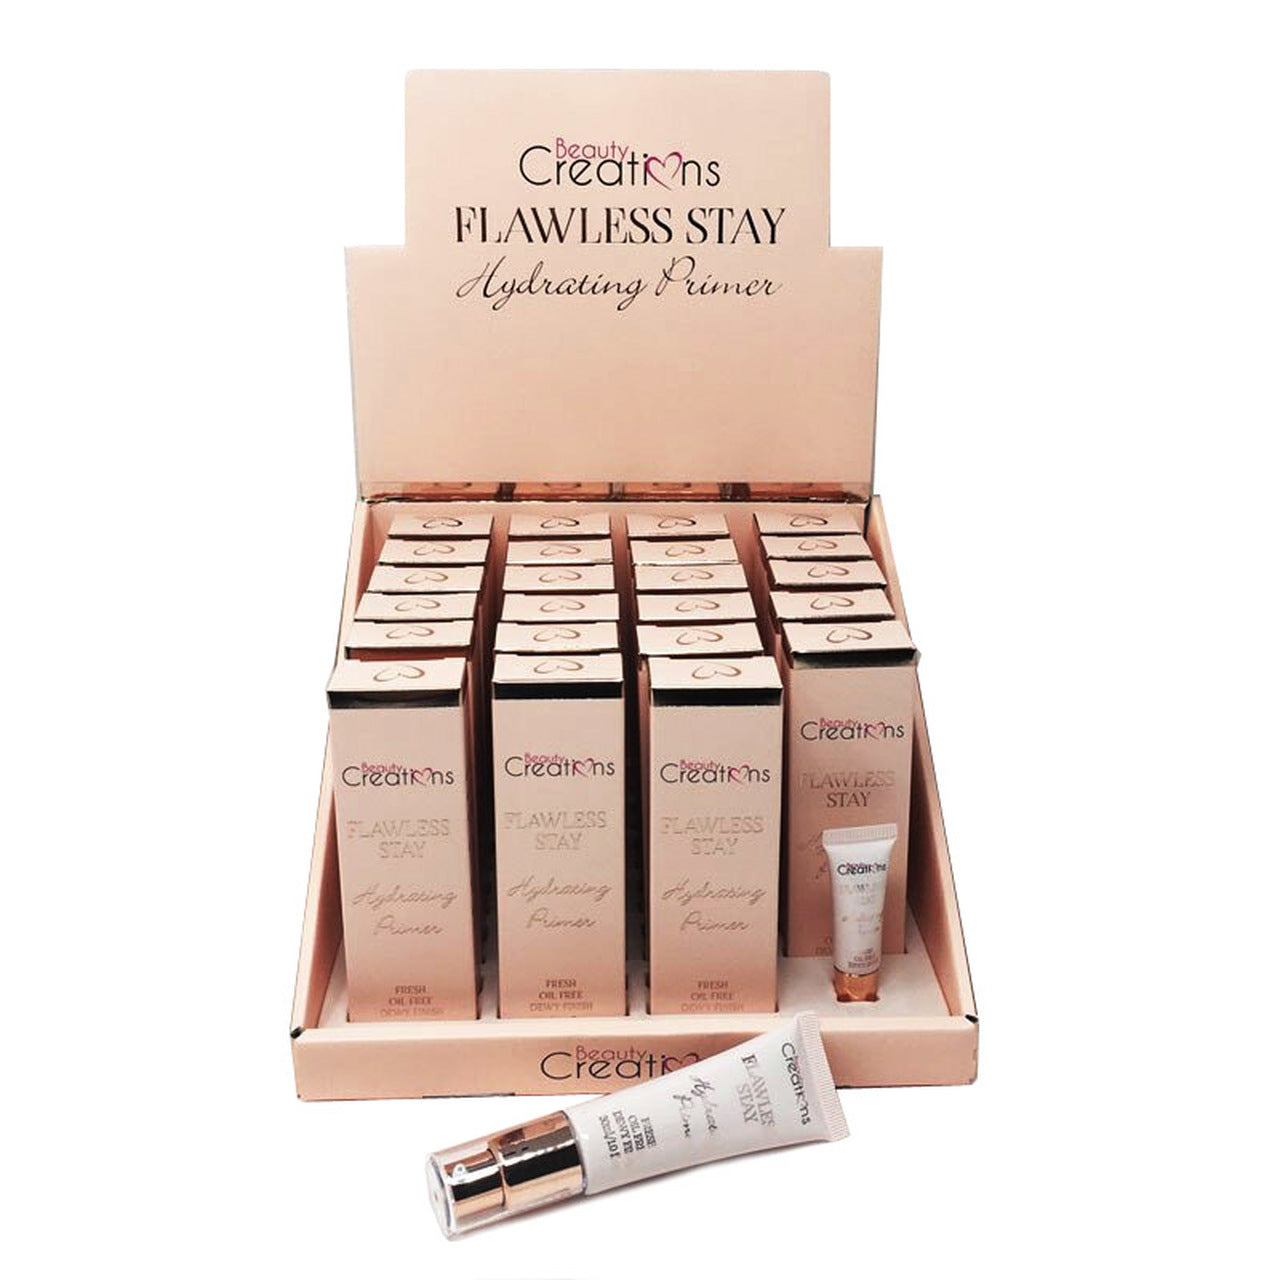 BC-PHS01 : Flawless Stay Hydrating Primer 1oz -23 PCS with 1 Free Tester